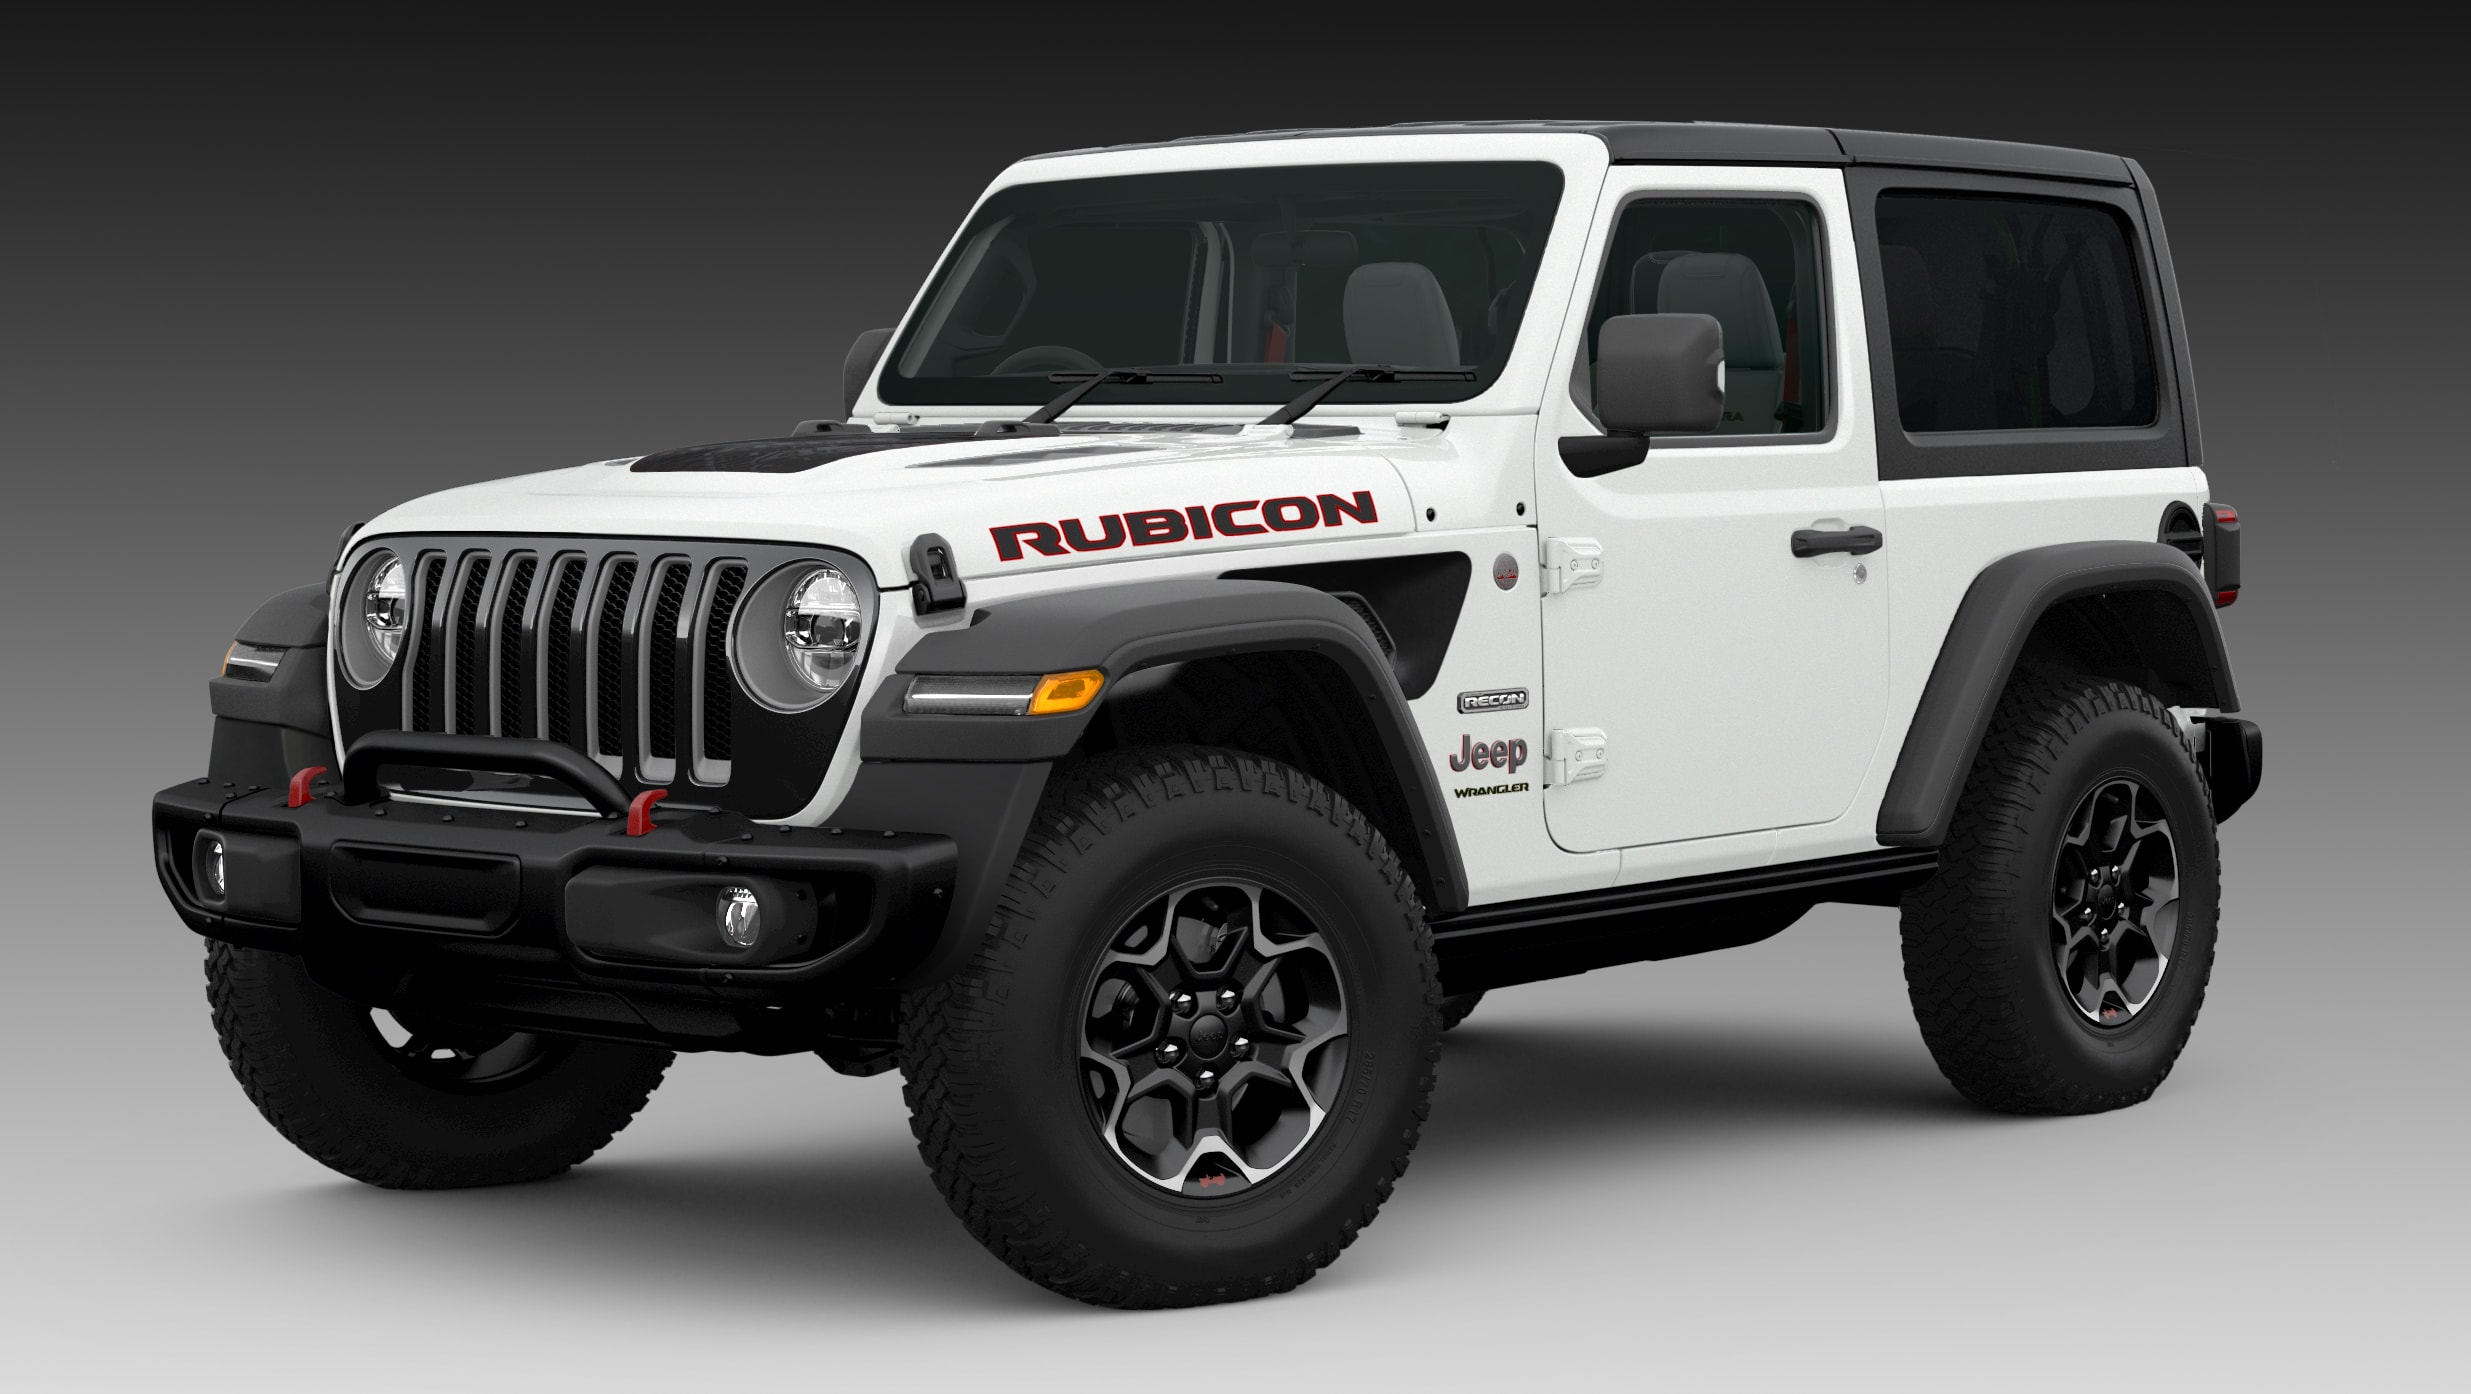 New Jeep Wrangler Rubicon Recon 2020 pricing and specs detailed: Two-door  returns to take fight to Suzuki Jimny - Car News | CarsGuide